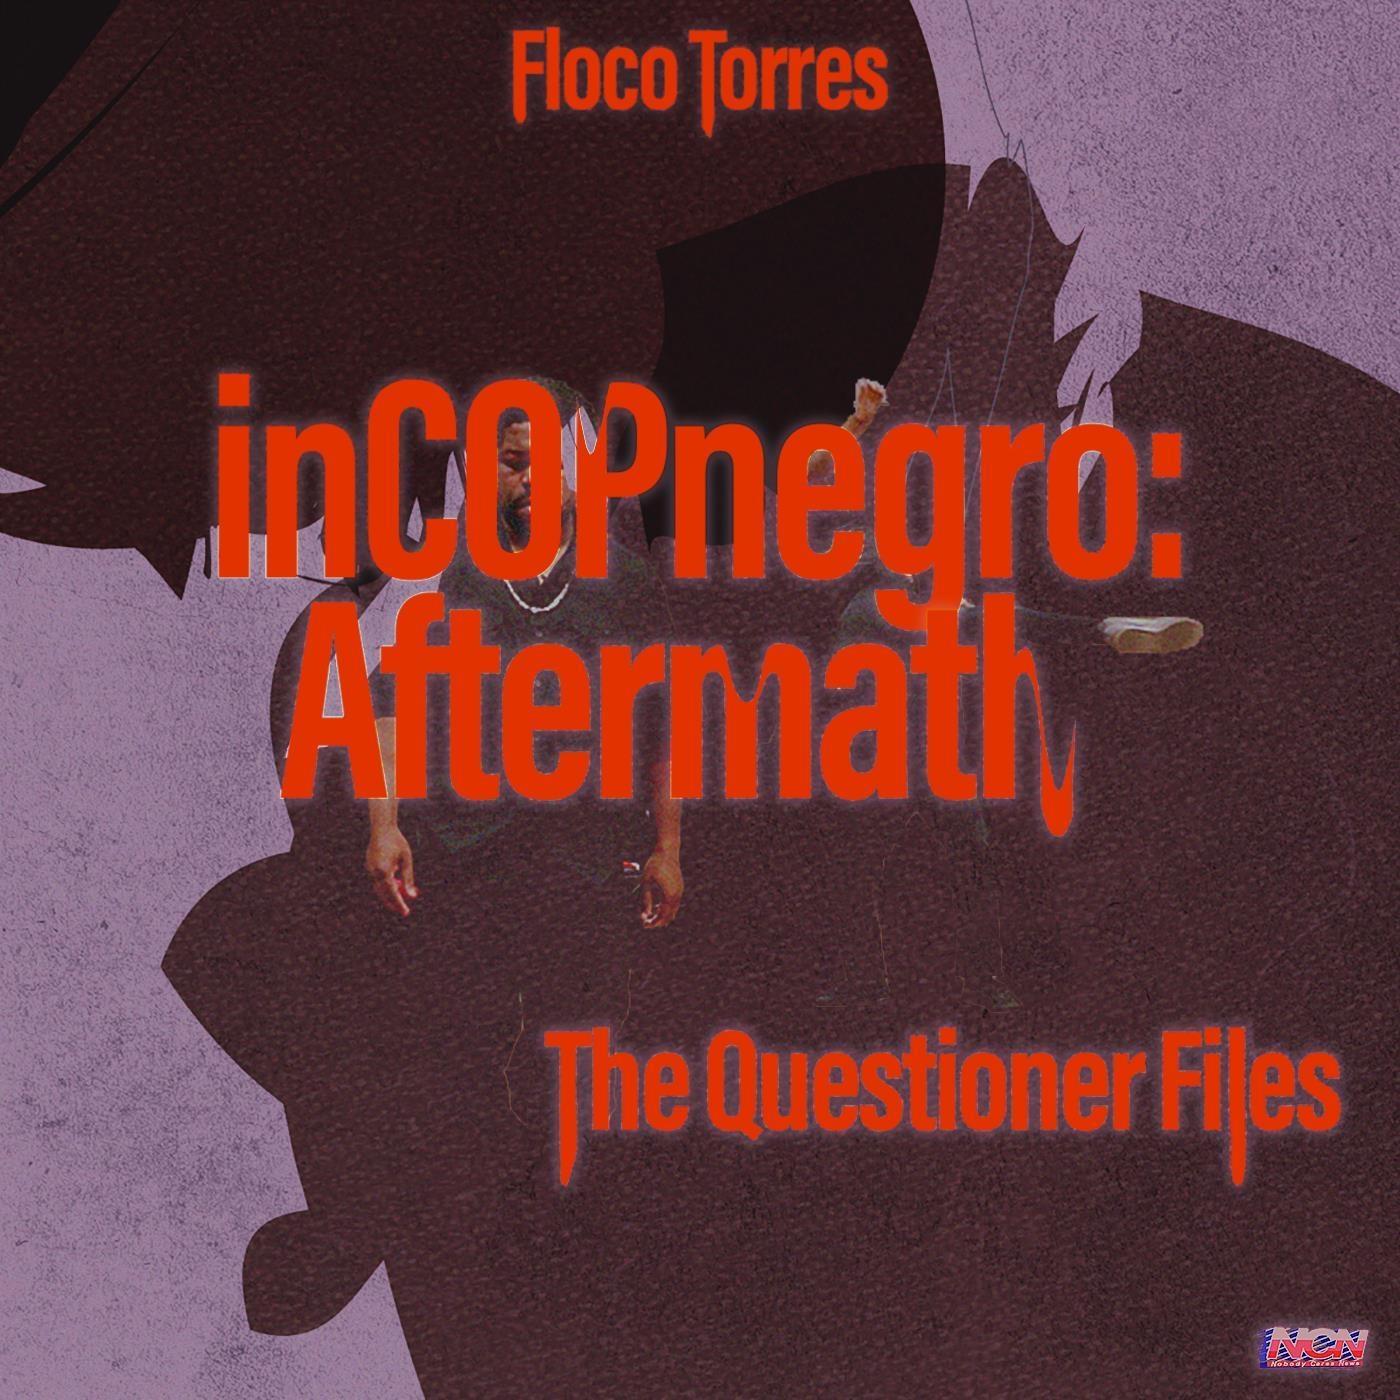 Floco Torres - The Answer